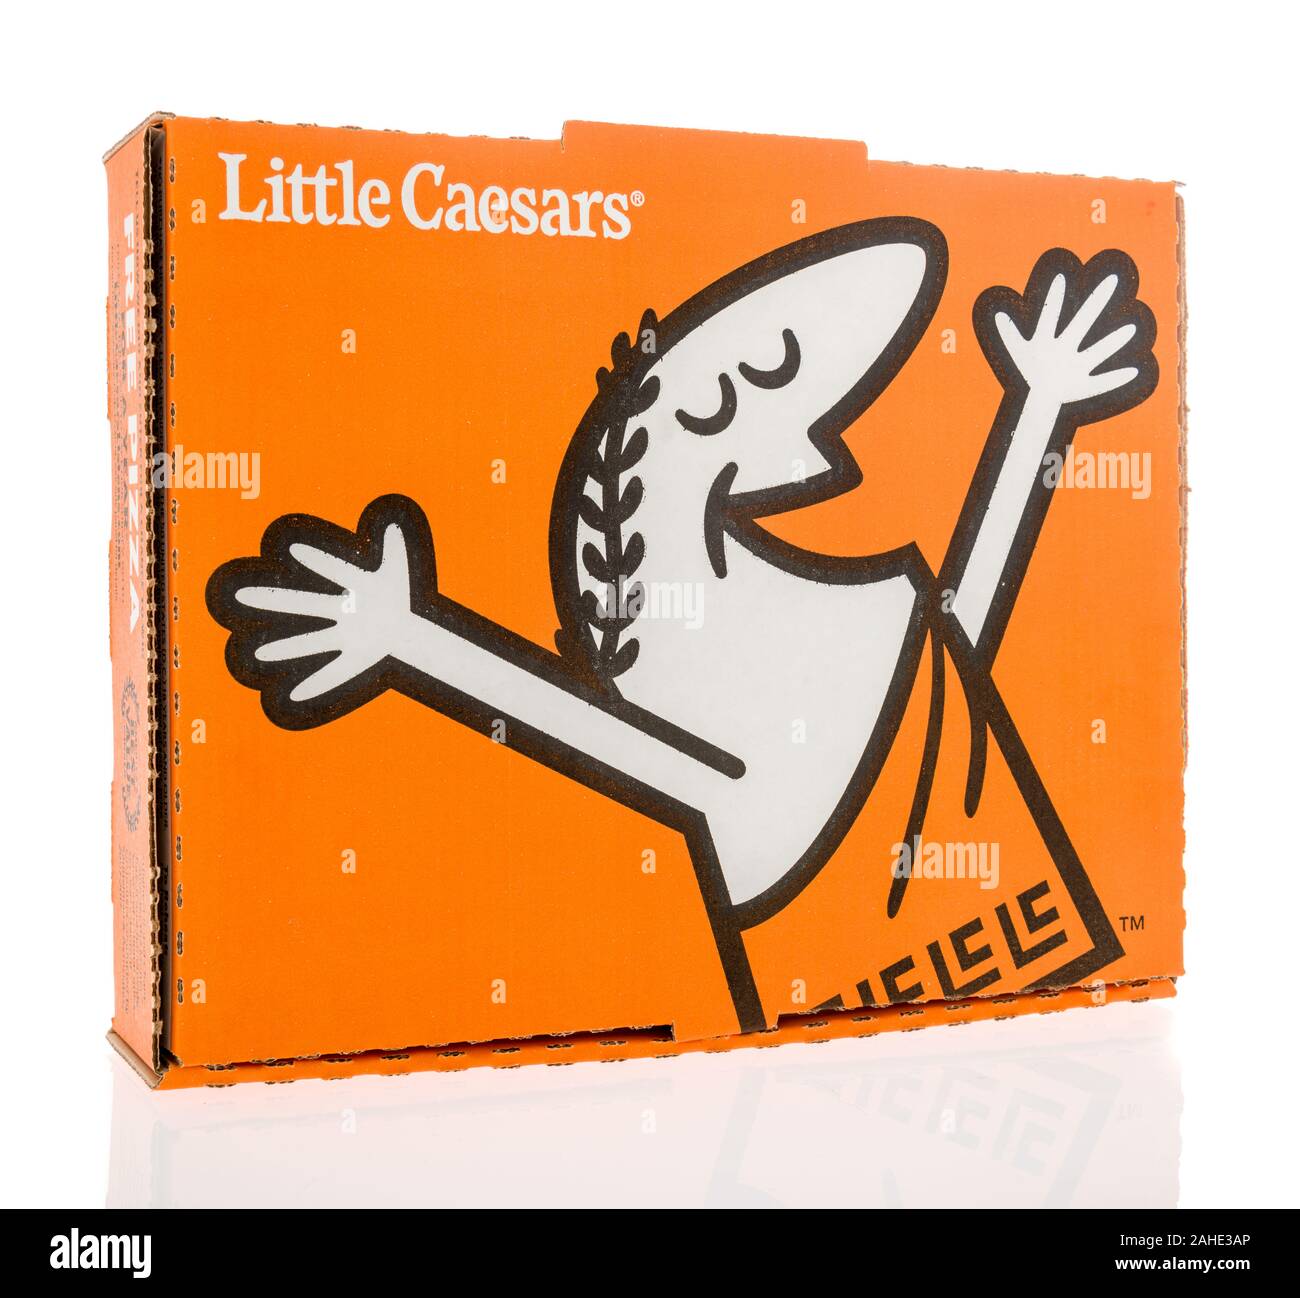 Winneconne, WI - 3 December 2019 : A package of little Caesars pizza 5 dollar lunch combo box on an isolated background Stock Photo